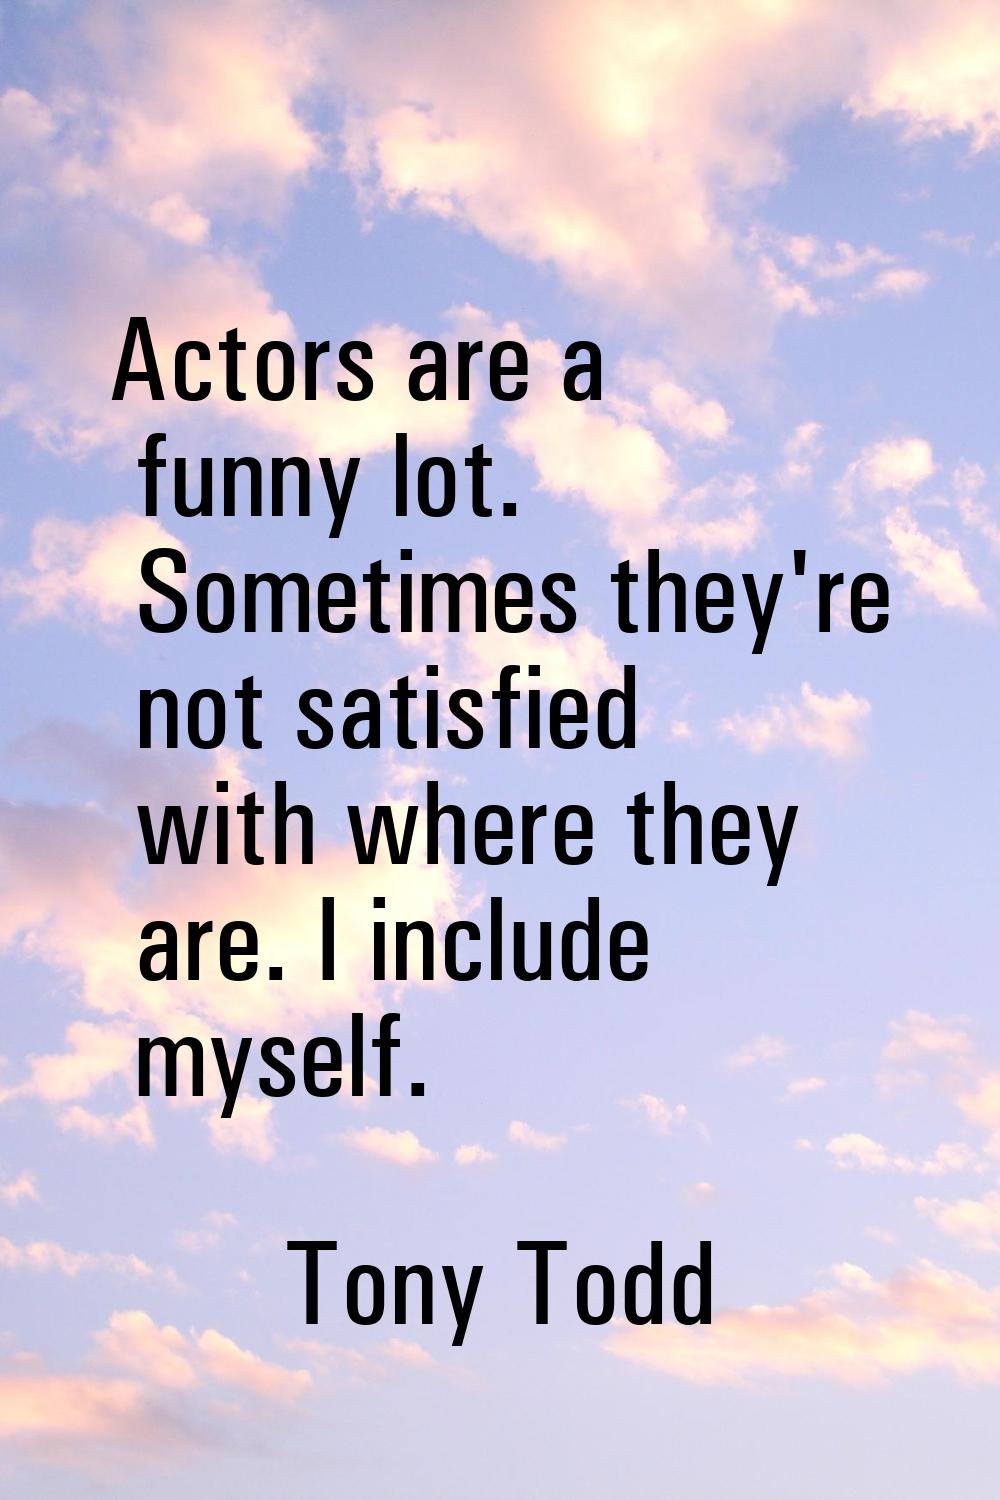 Actors are a funny lot. Sometimes they're not satisfied with where they are. I include myself.